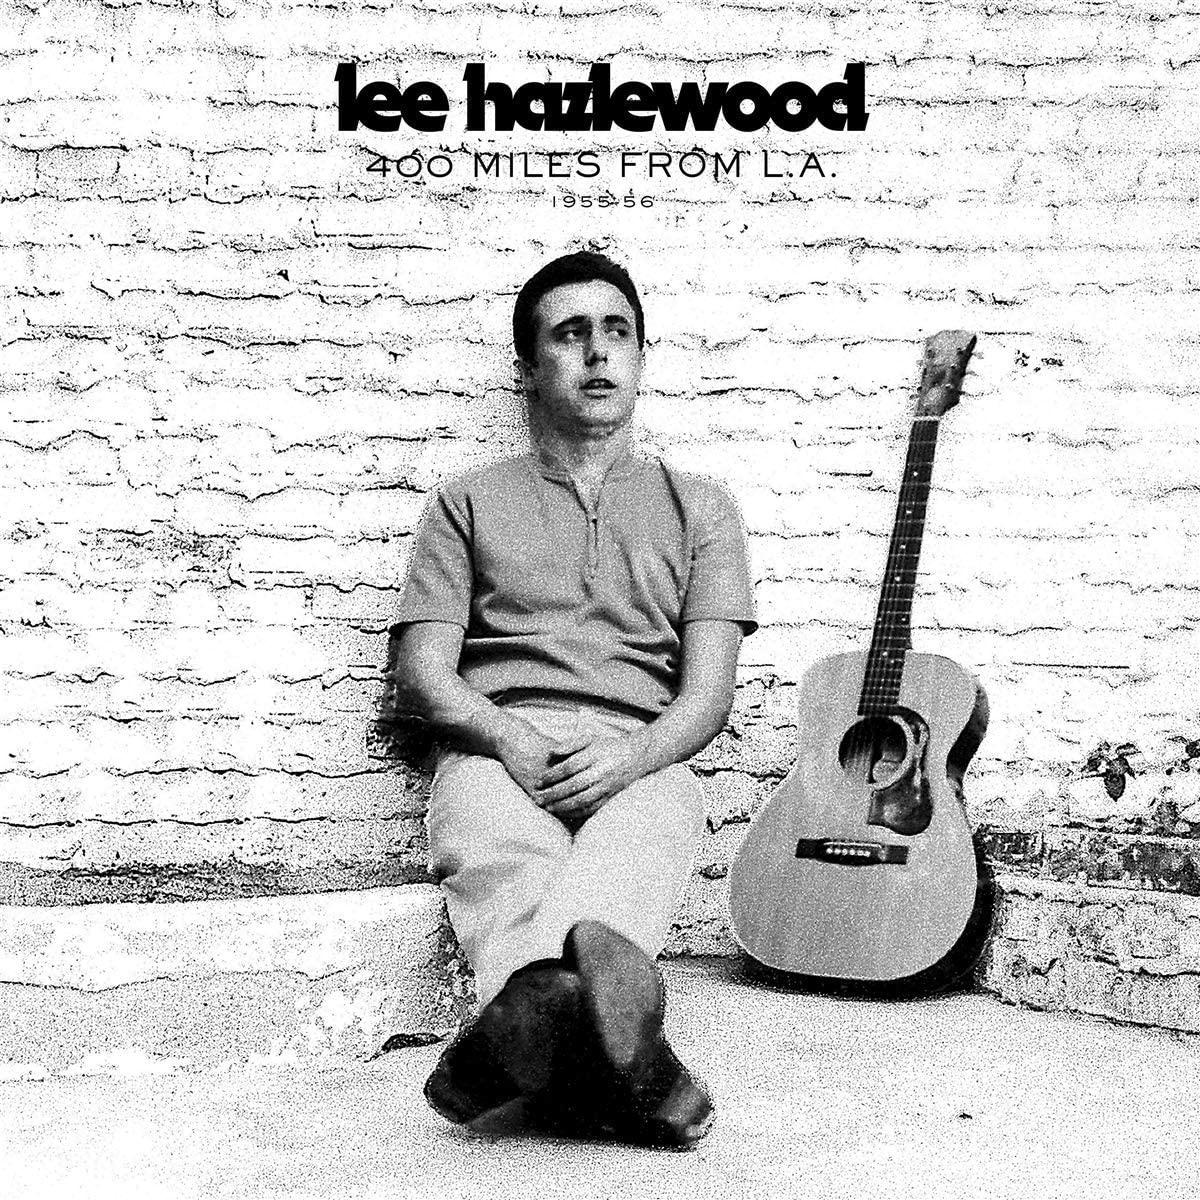 Lee Hazlewood - 400 Miles From L.A. - CD